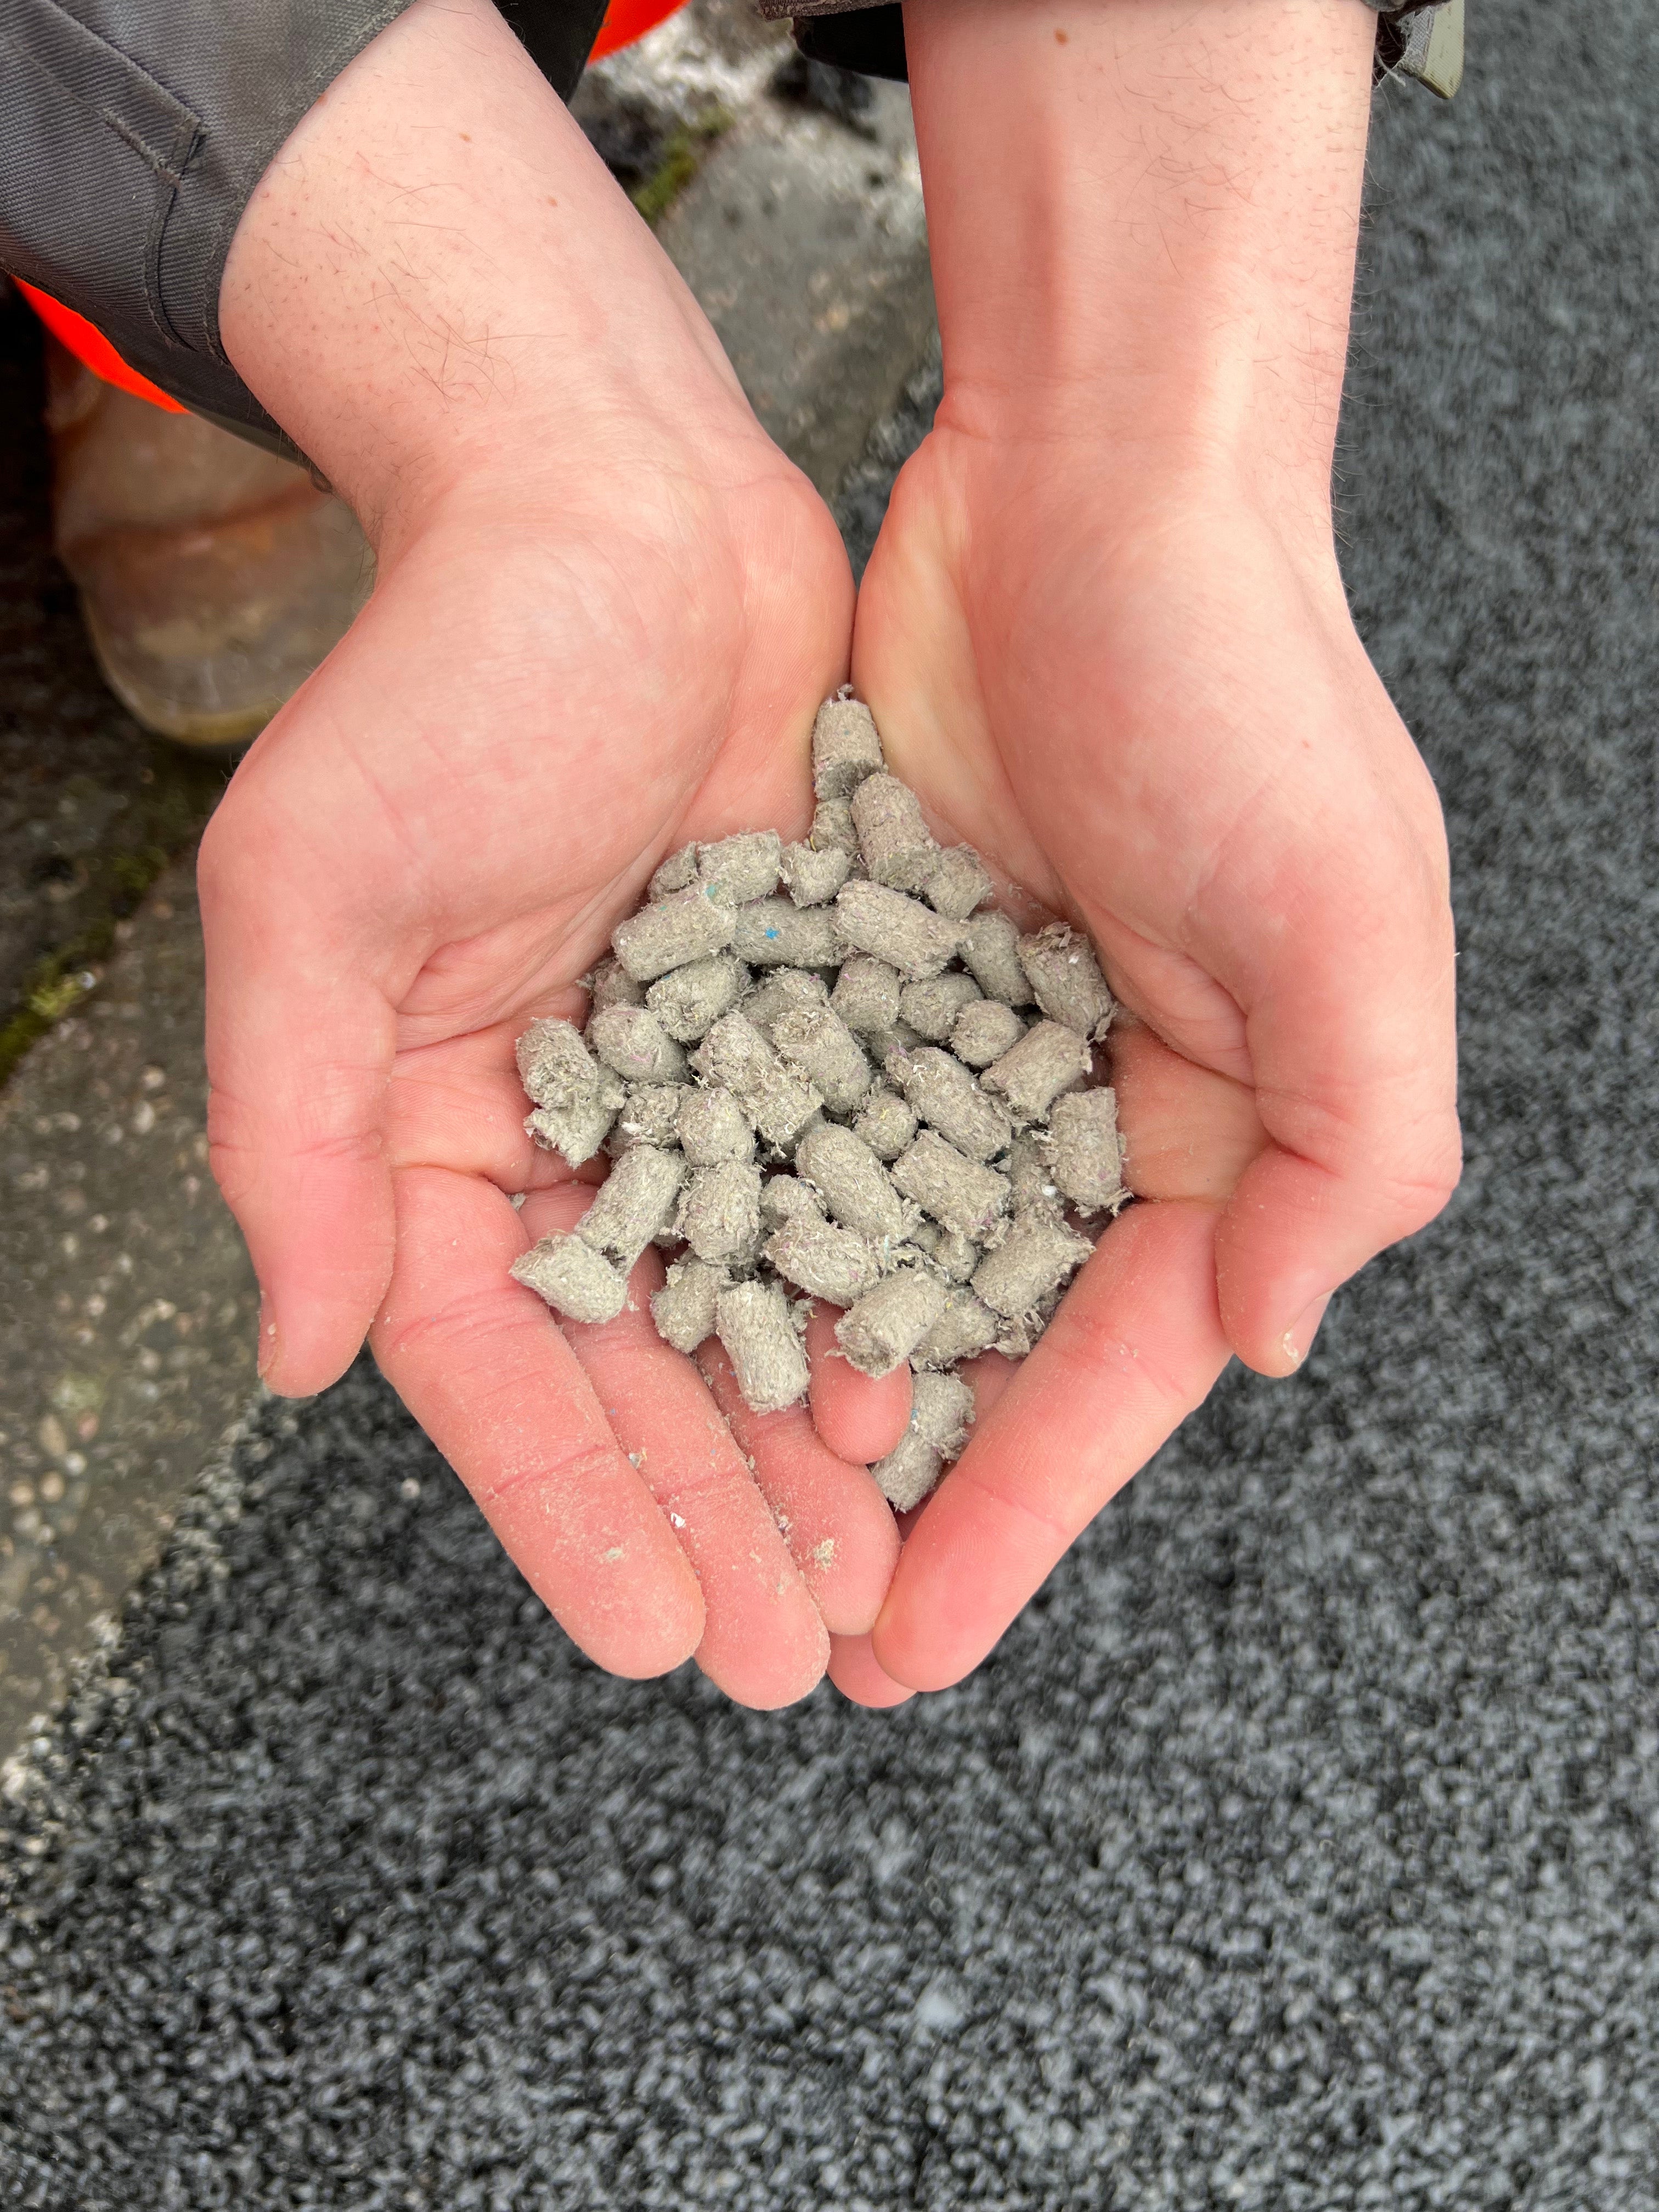 The nappy pellets being used to make Wales’ road surfaces